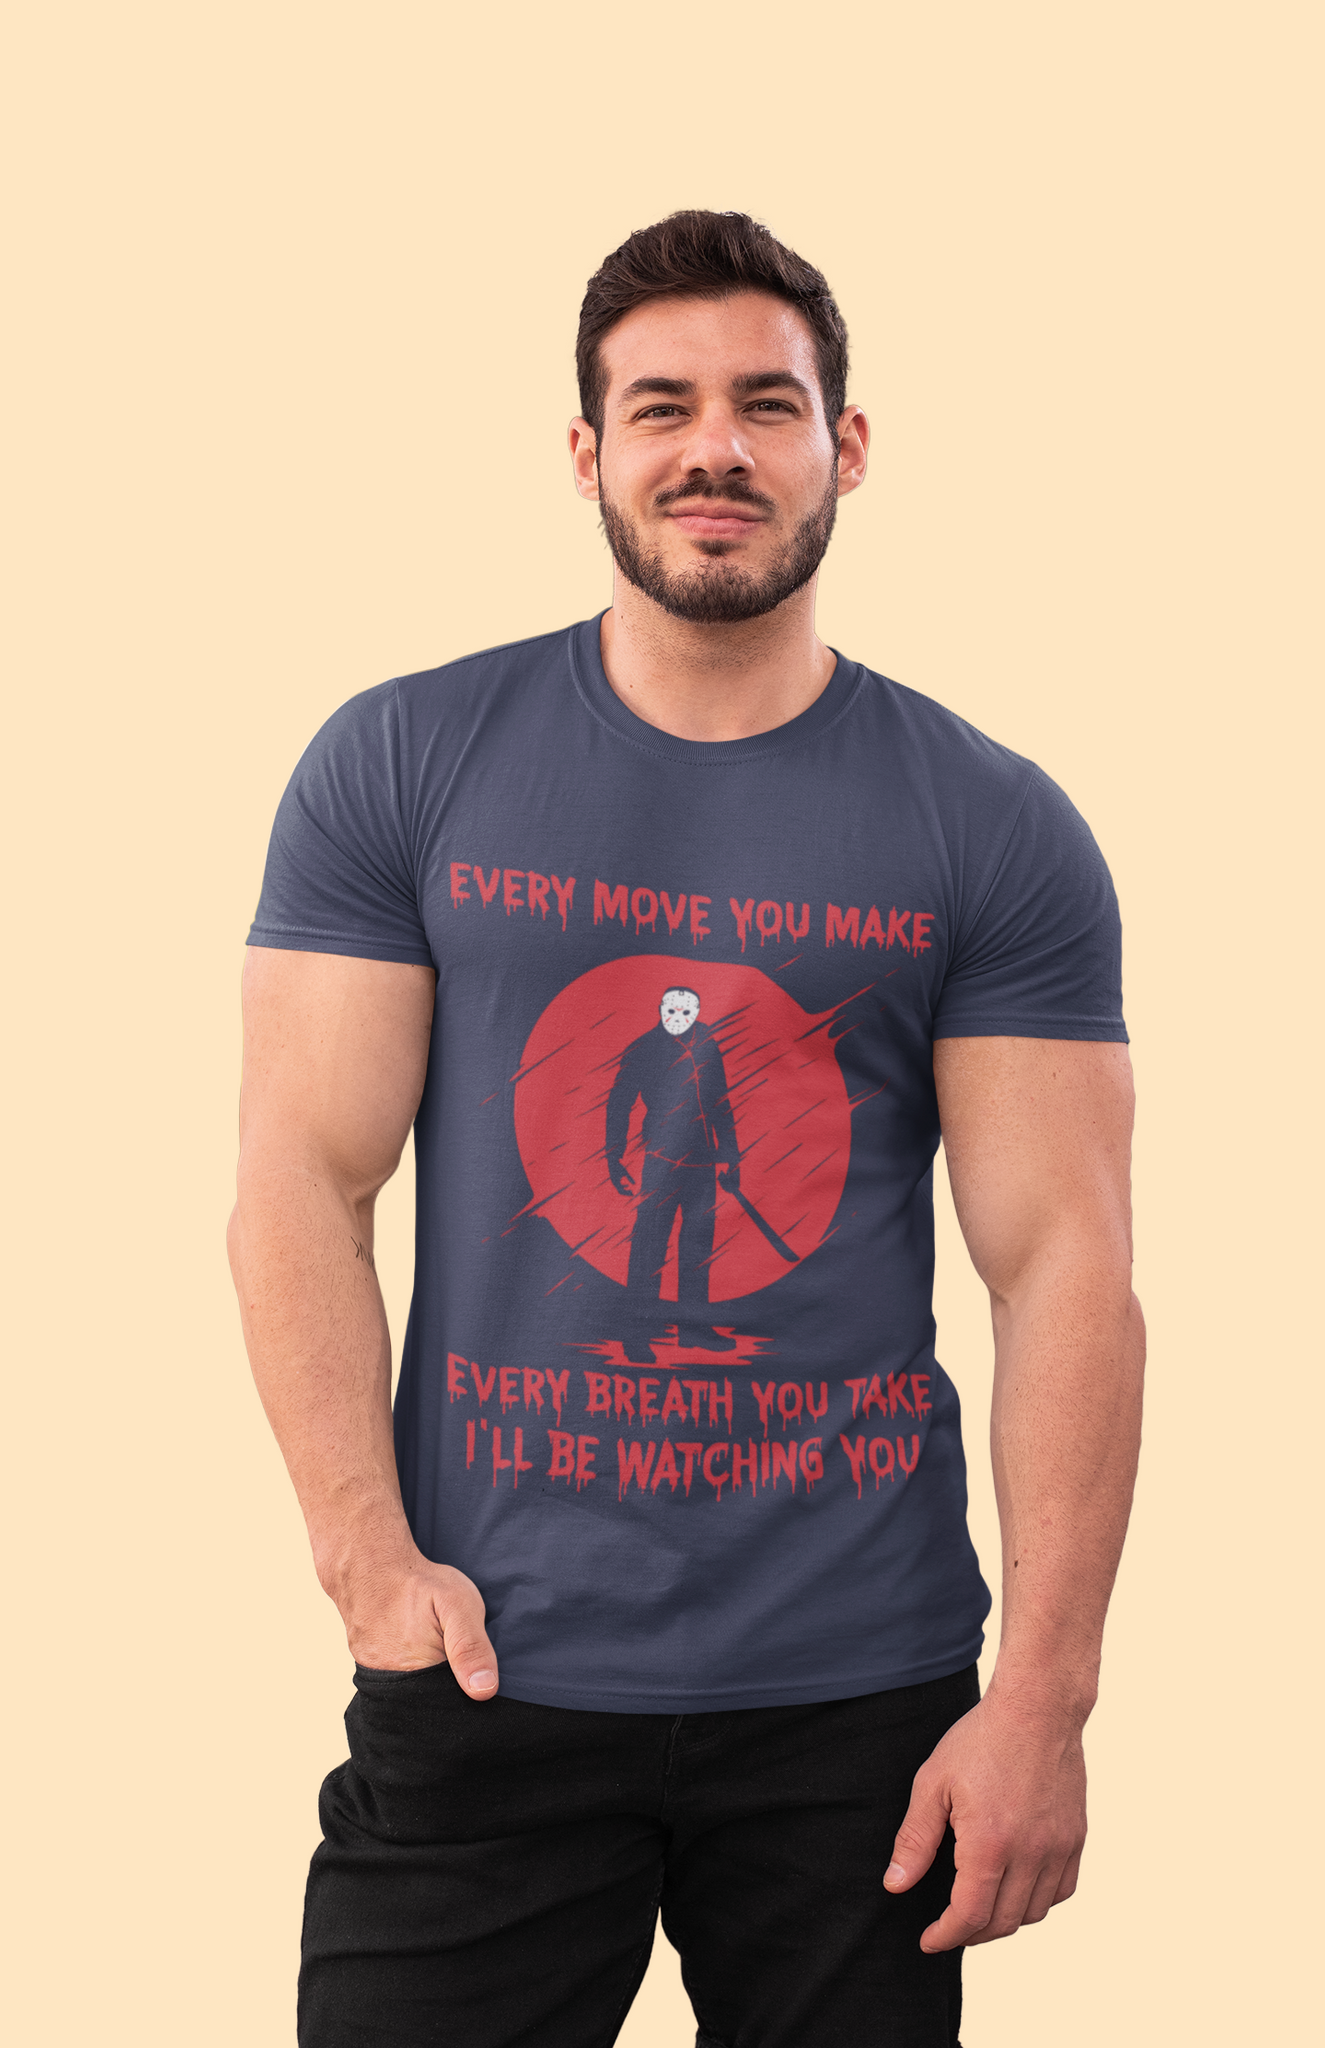 Friday 13th T Shirt, Jason Voorhees T Shirt, Every Move You Make Breath You Take Ill Be Watching You Tshirt, Halloween Gifts